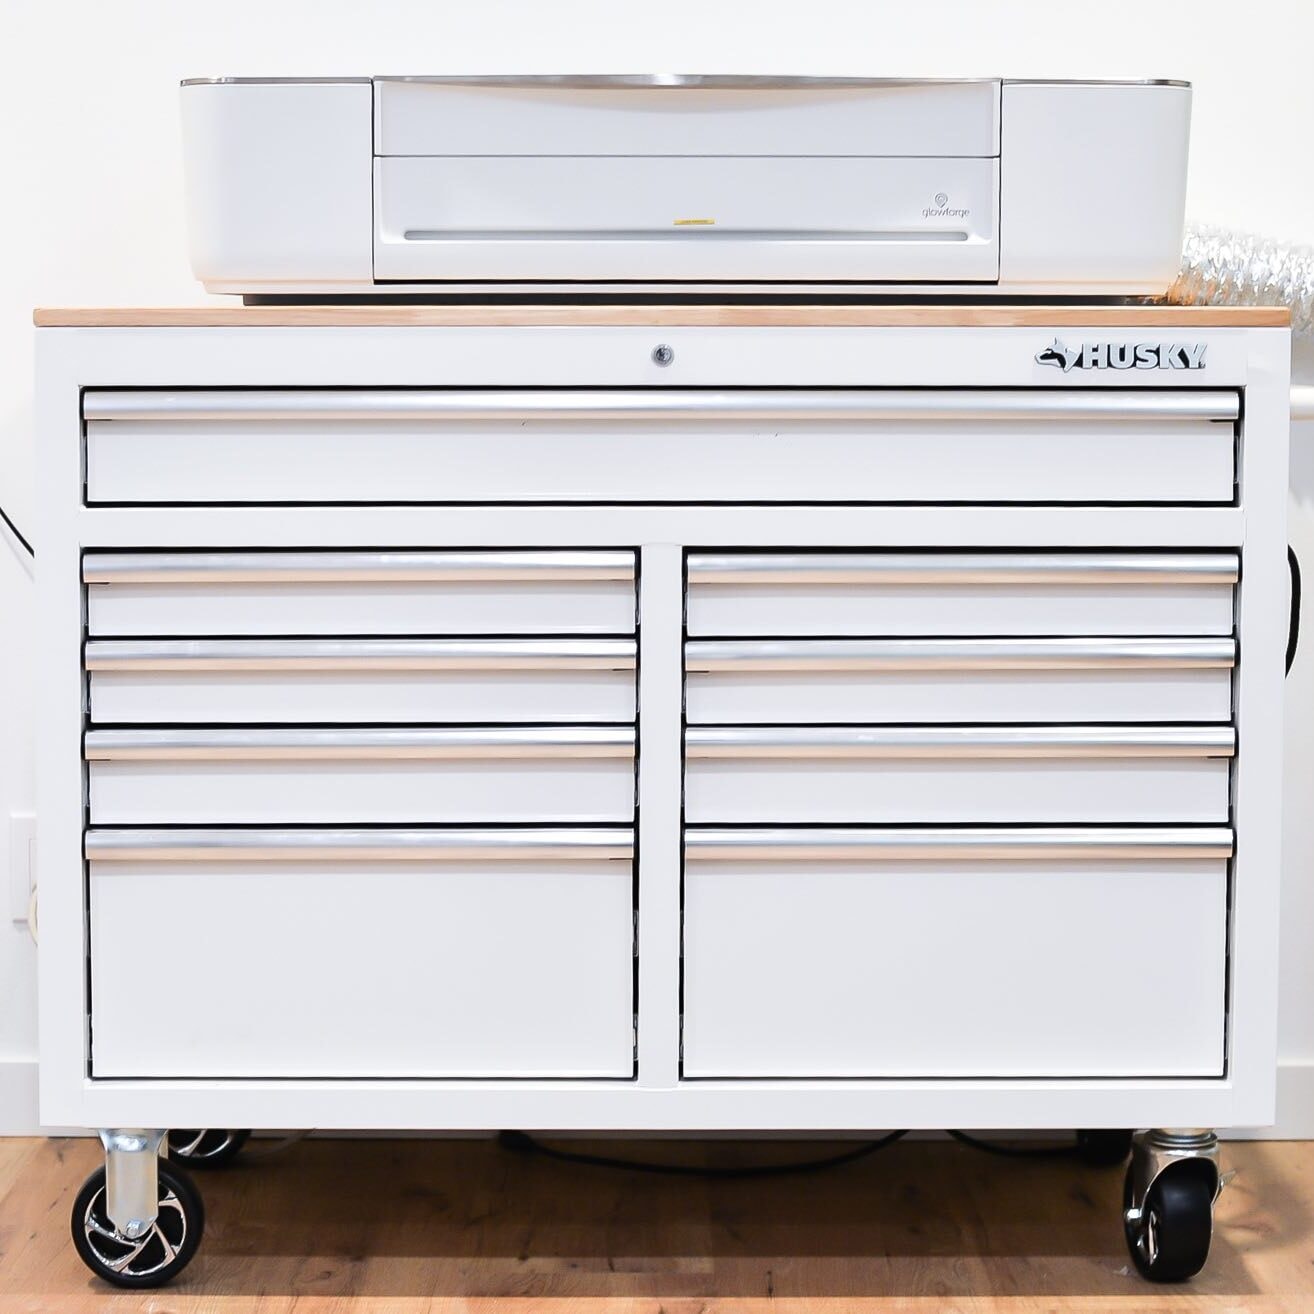 Husky Storage table for Glowforge - white with machine sitting on top